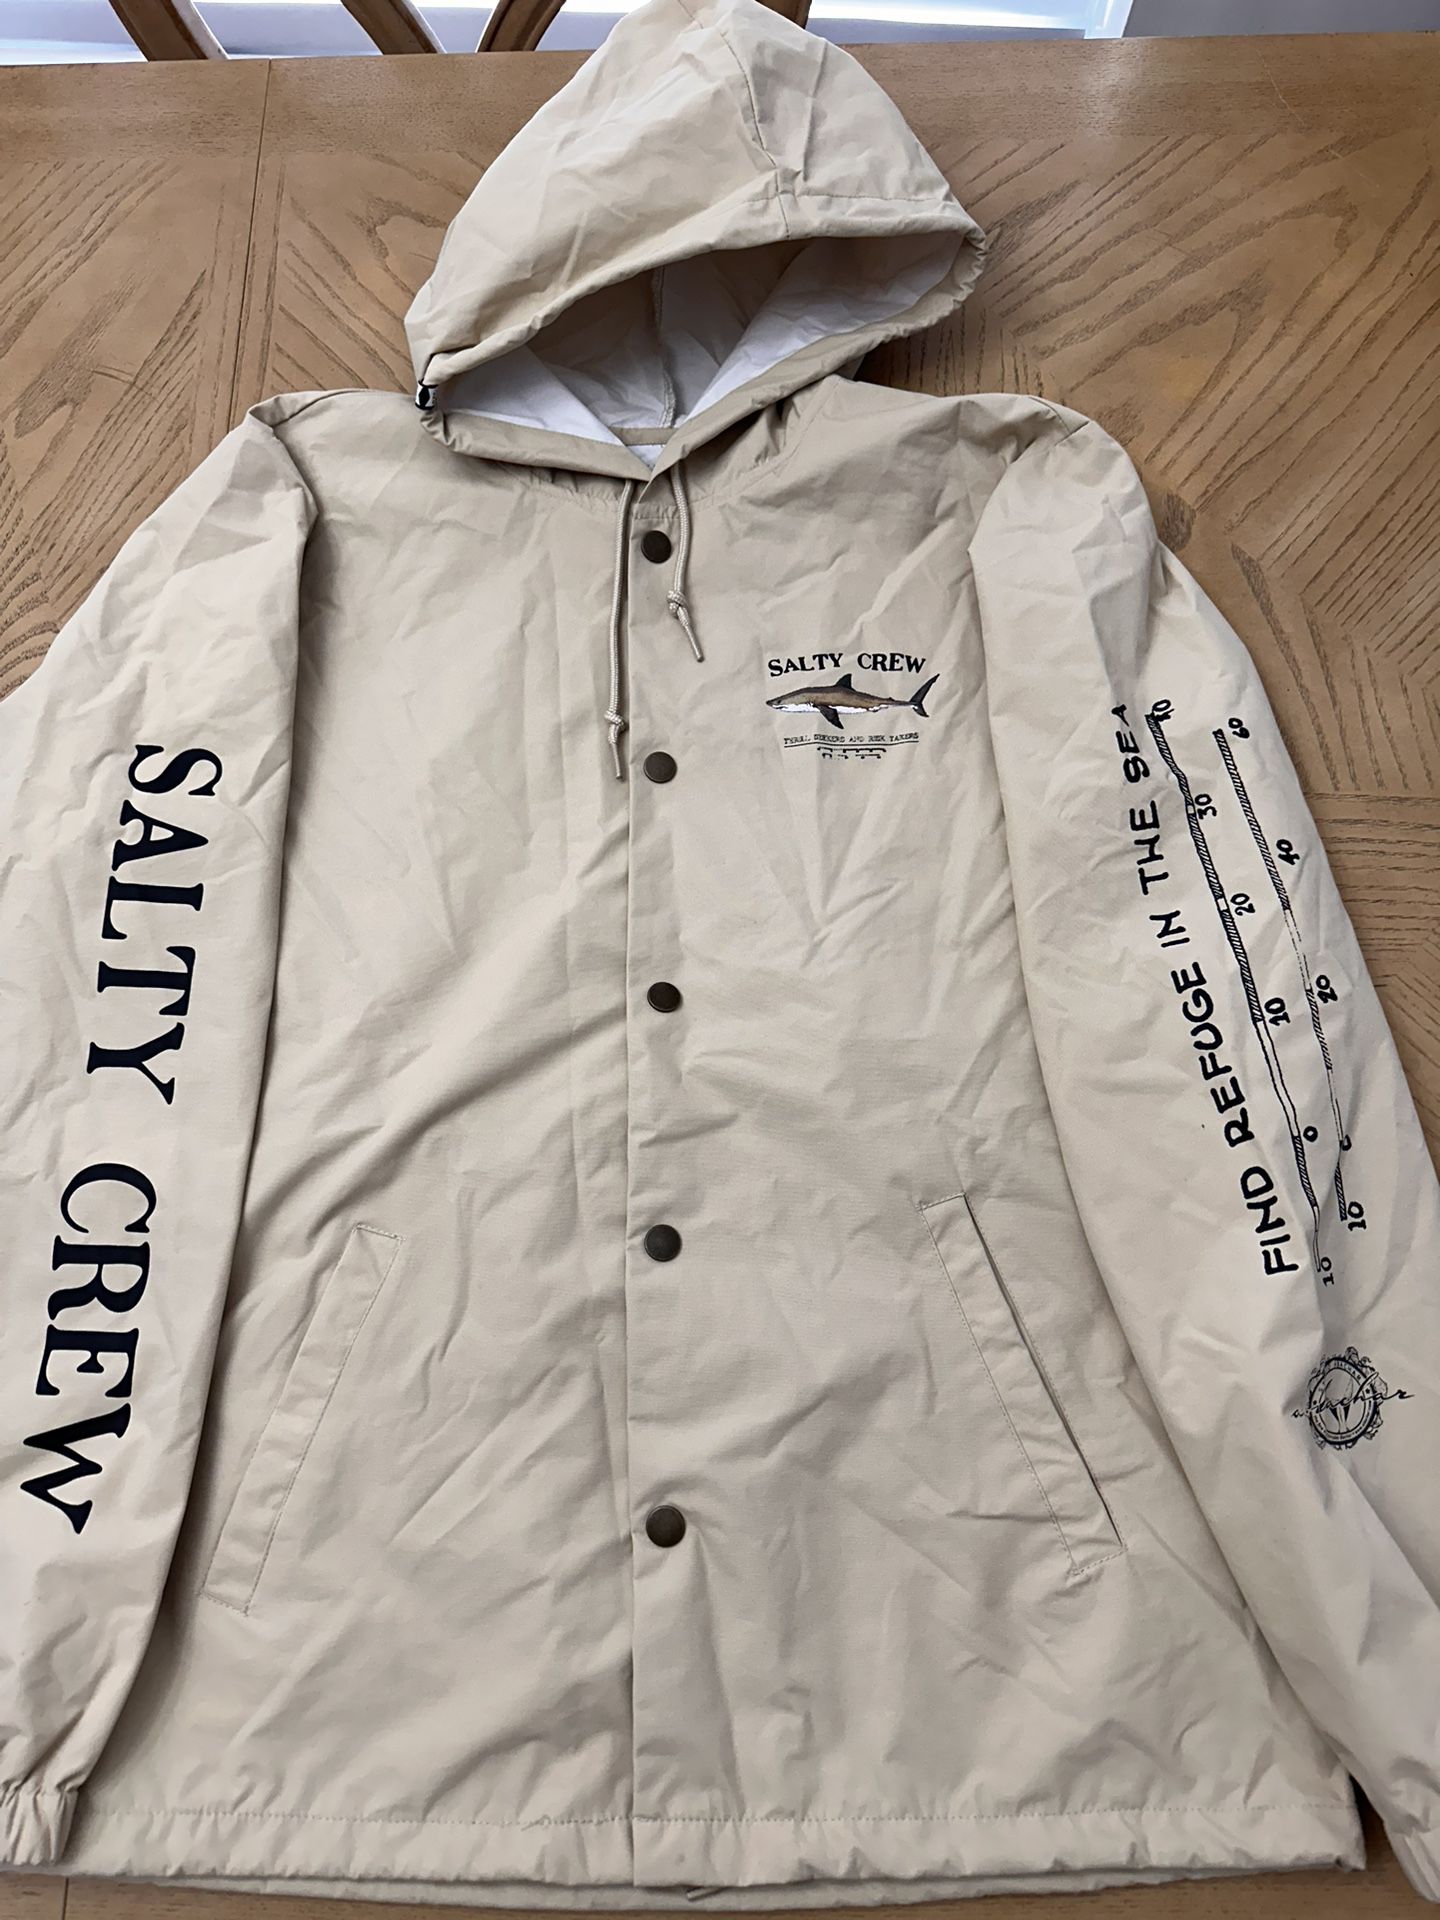 Salty Crew Bruce Snap hoodie Jacket  “Thrill Seekers and Risk Takers” Size Large 